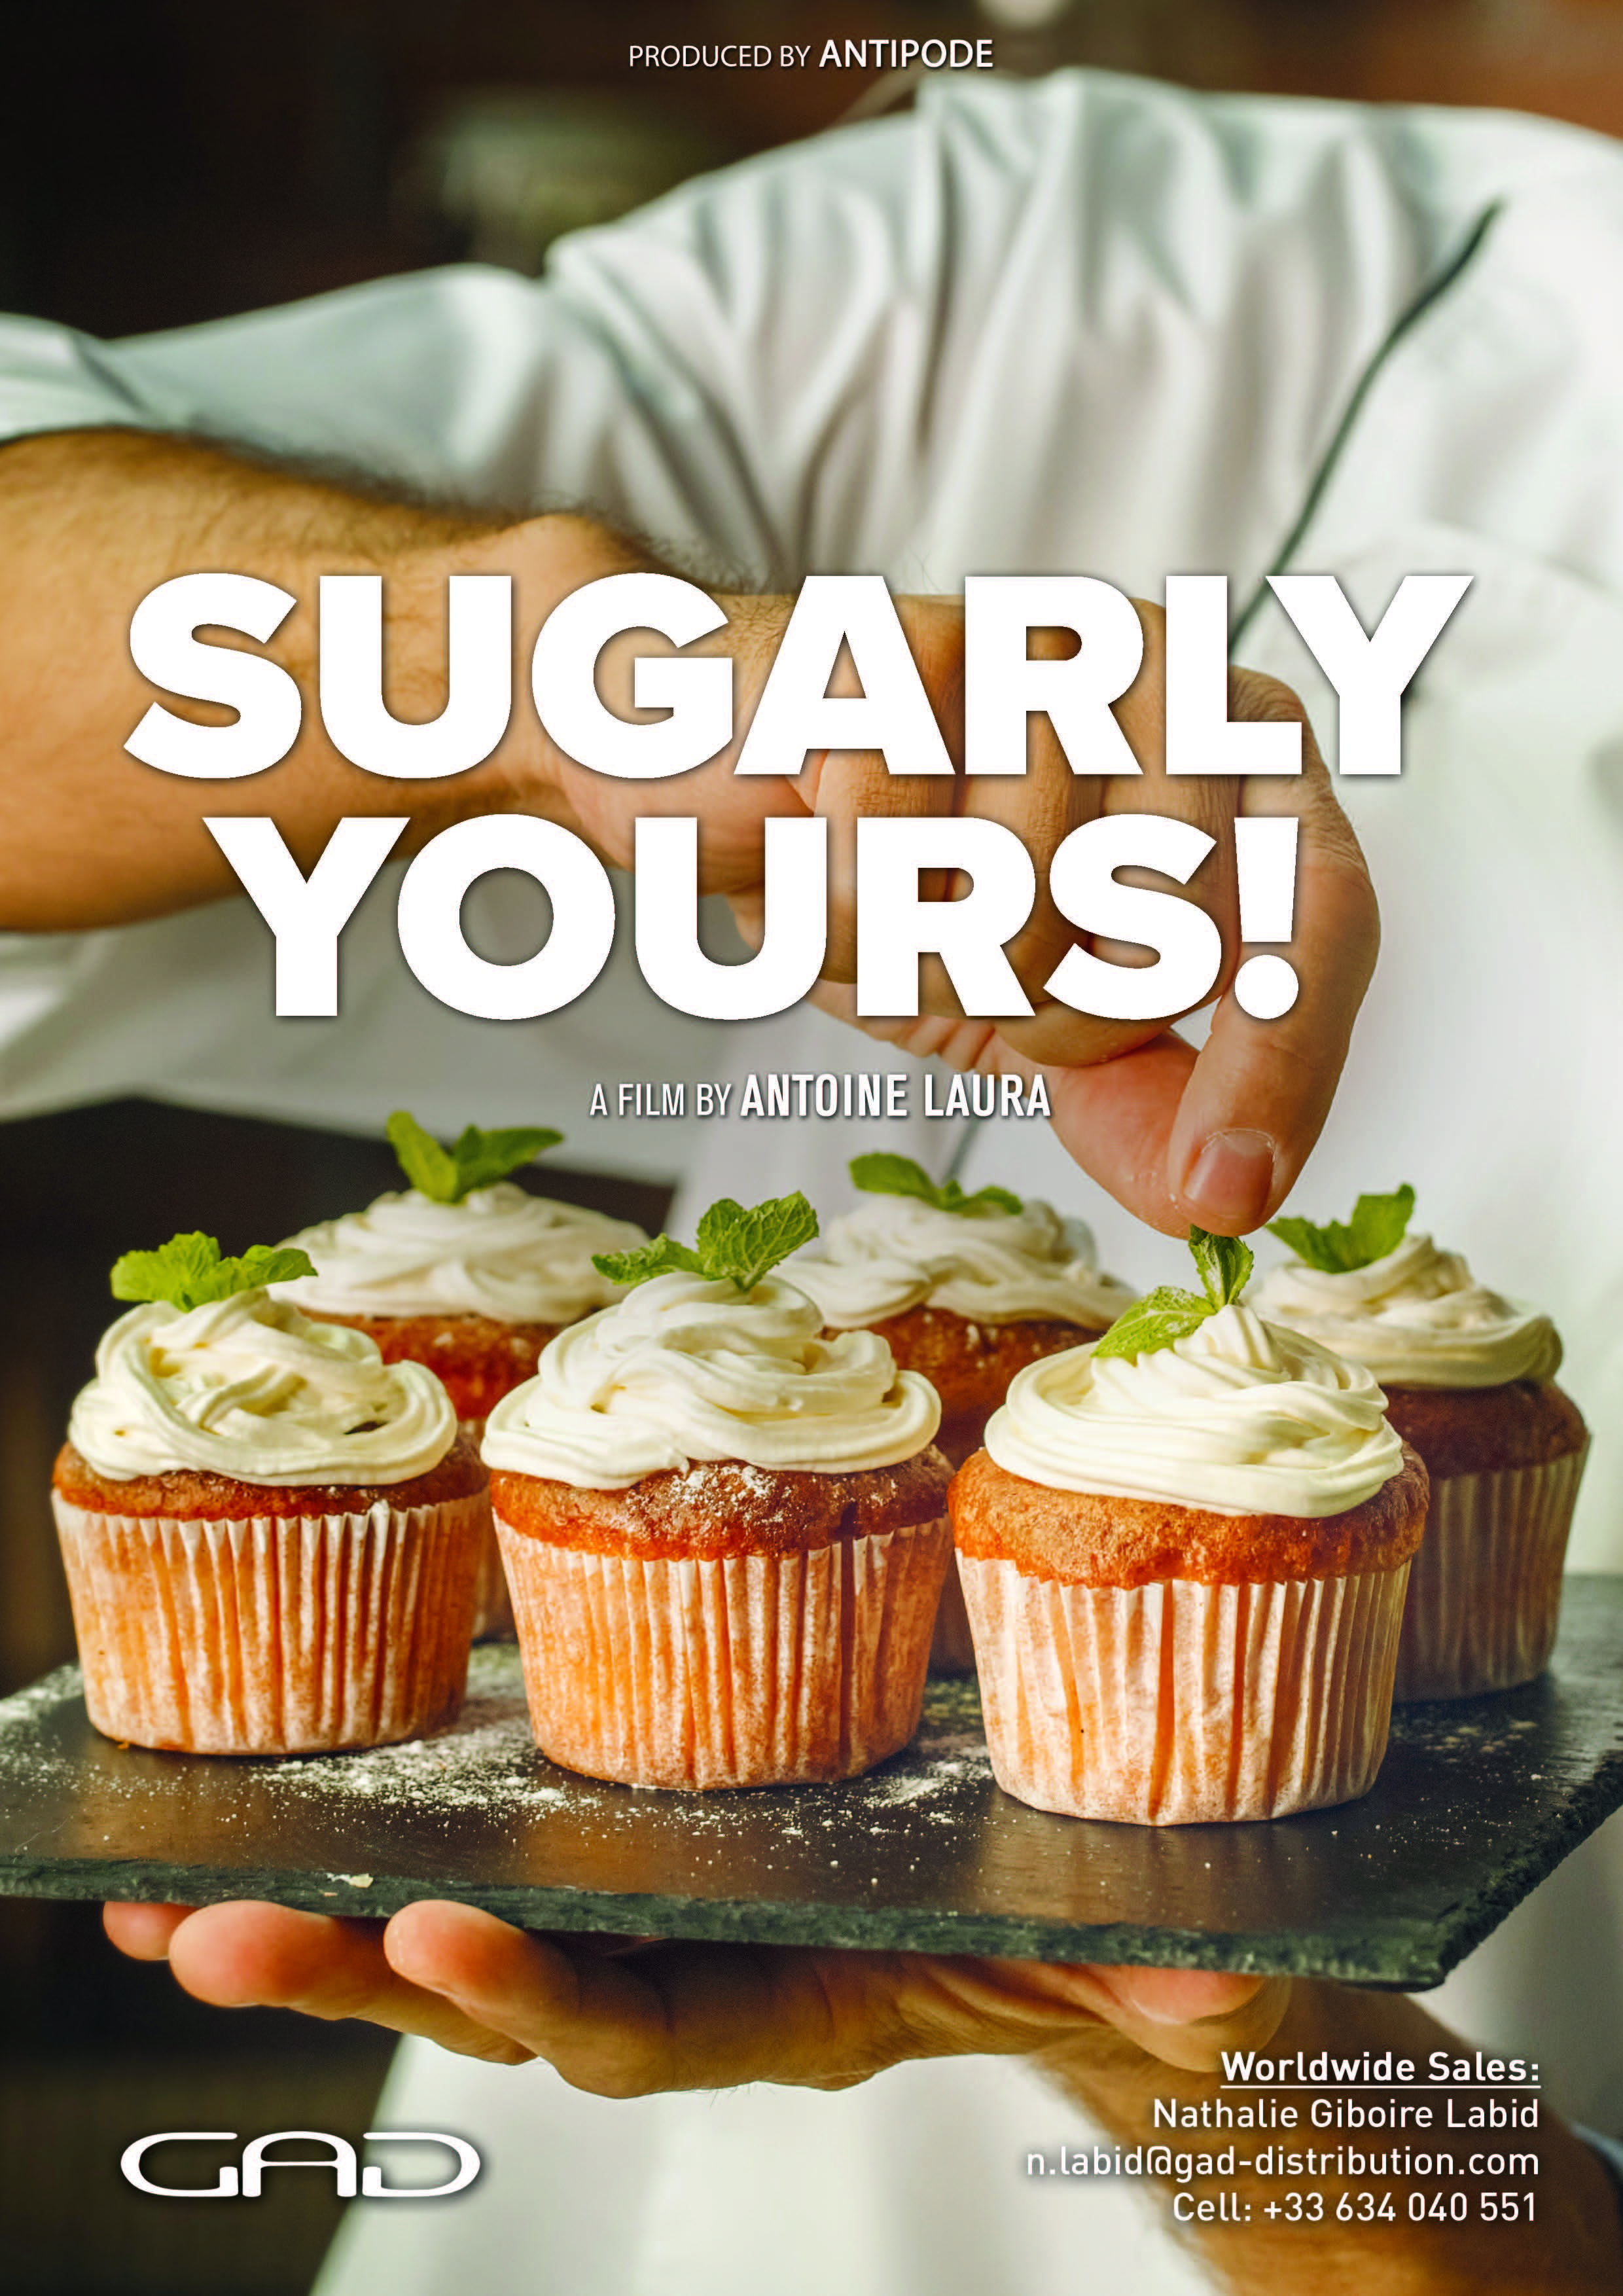 Sugarly yours ! - GAD